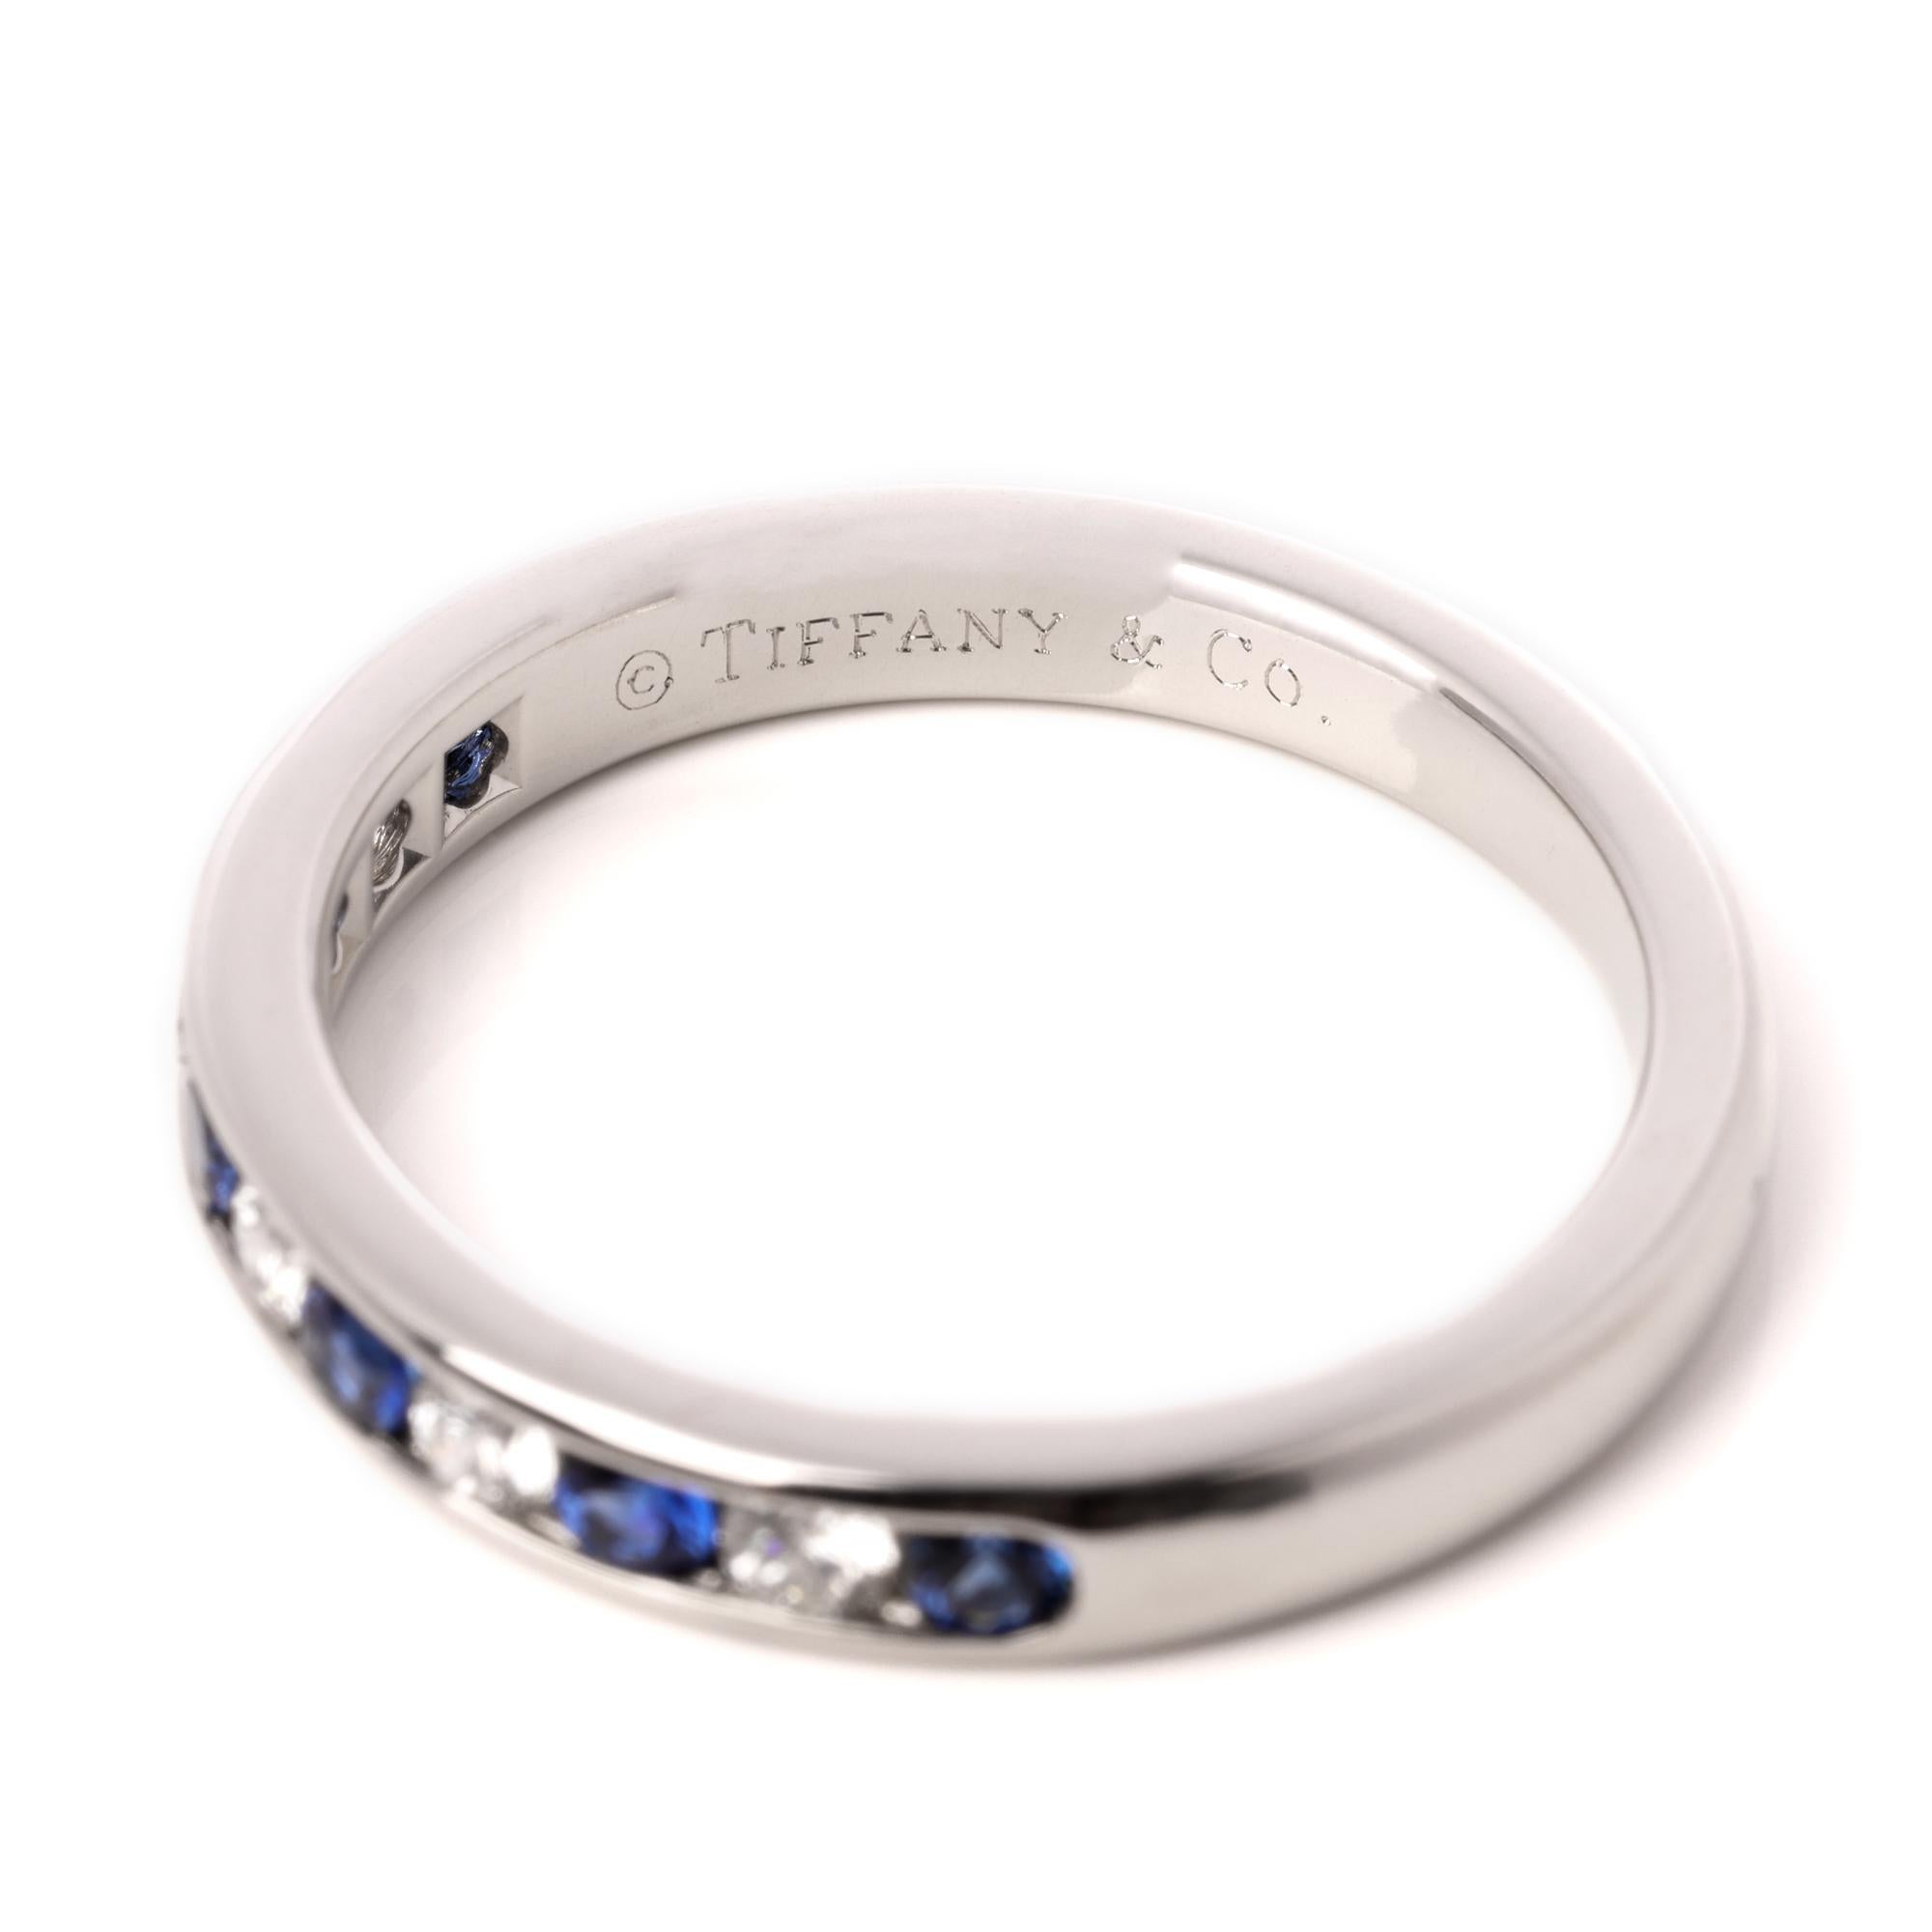 This ring by Tiffany & Co features 6 round brilliant Sapphires and 5 round brilliant Diamonds. 
RRP	£3,075
ITEM CONDITION	Excellent
MANUFACTURER	Tiffany & Co.
GENDER	Women's
UK RING SIZE	L
EU RING SIZE	51
US RING SIZE	6
BAND WIDTH	3mm
TOTAL